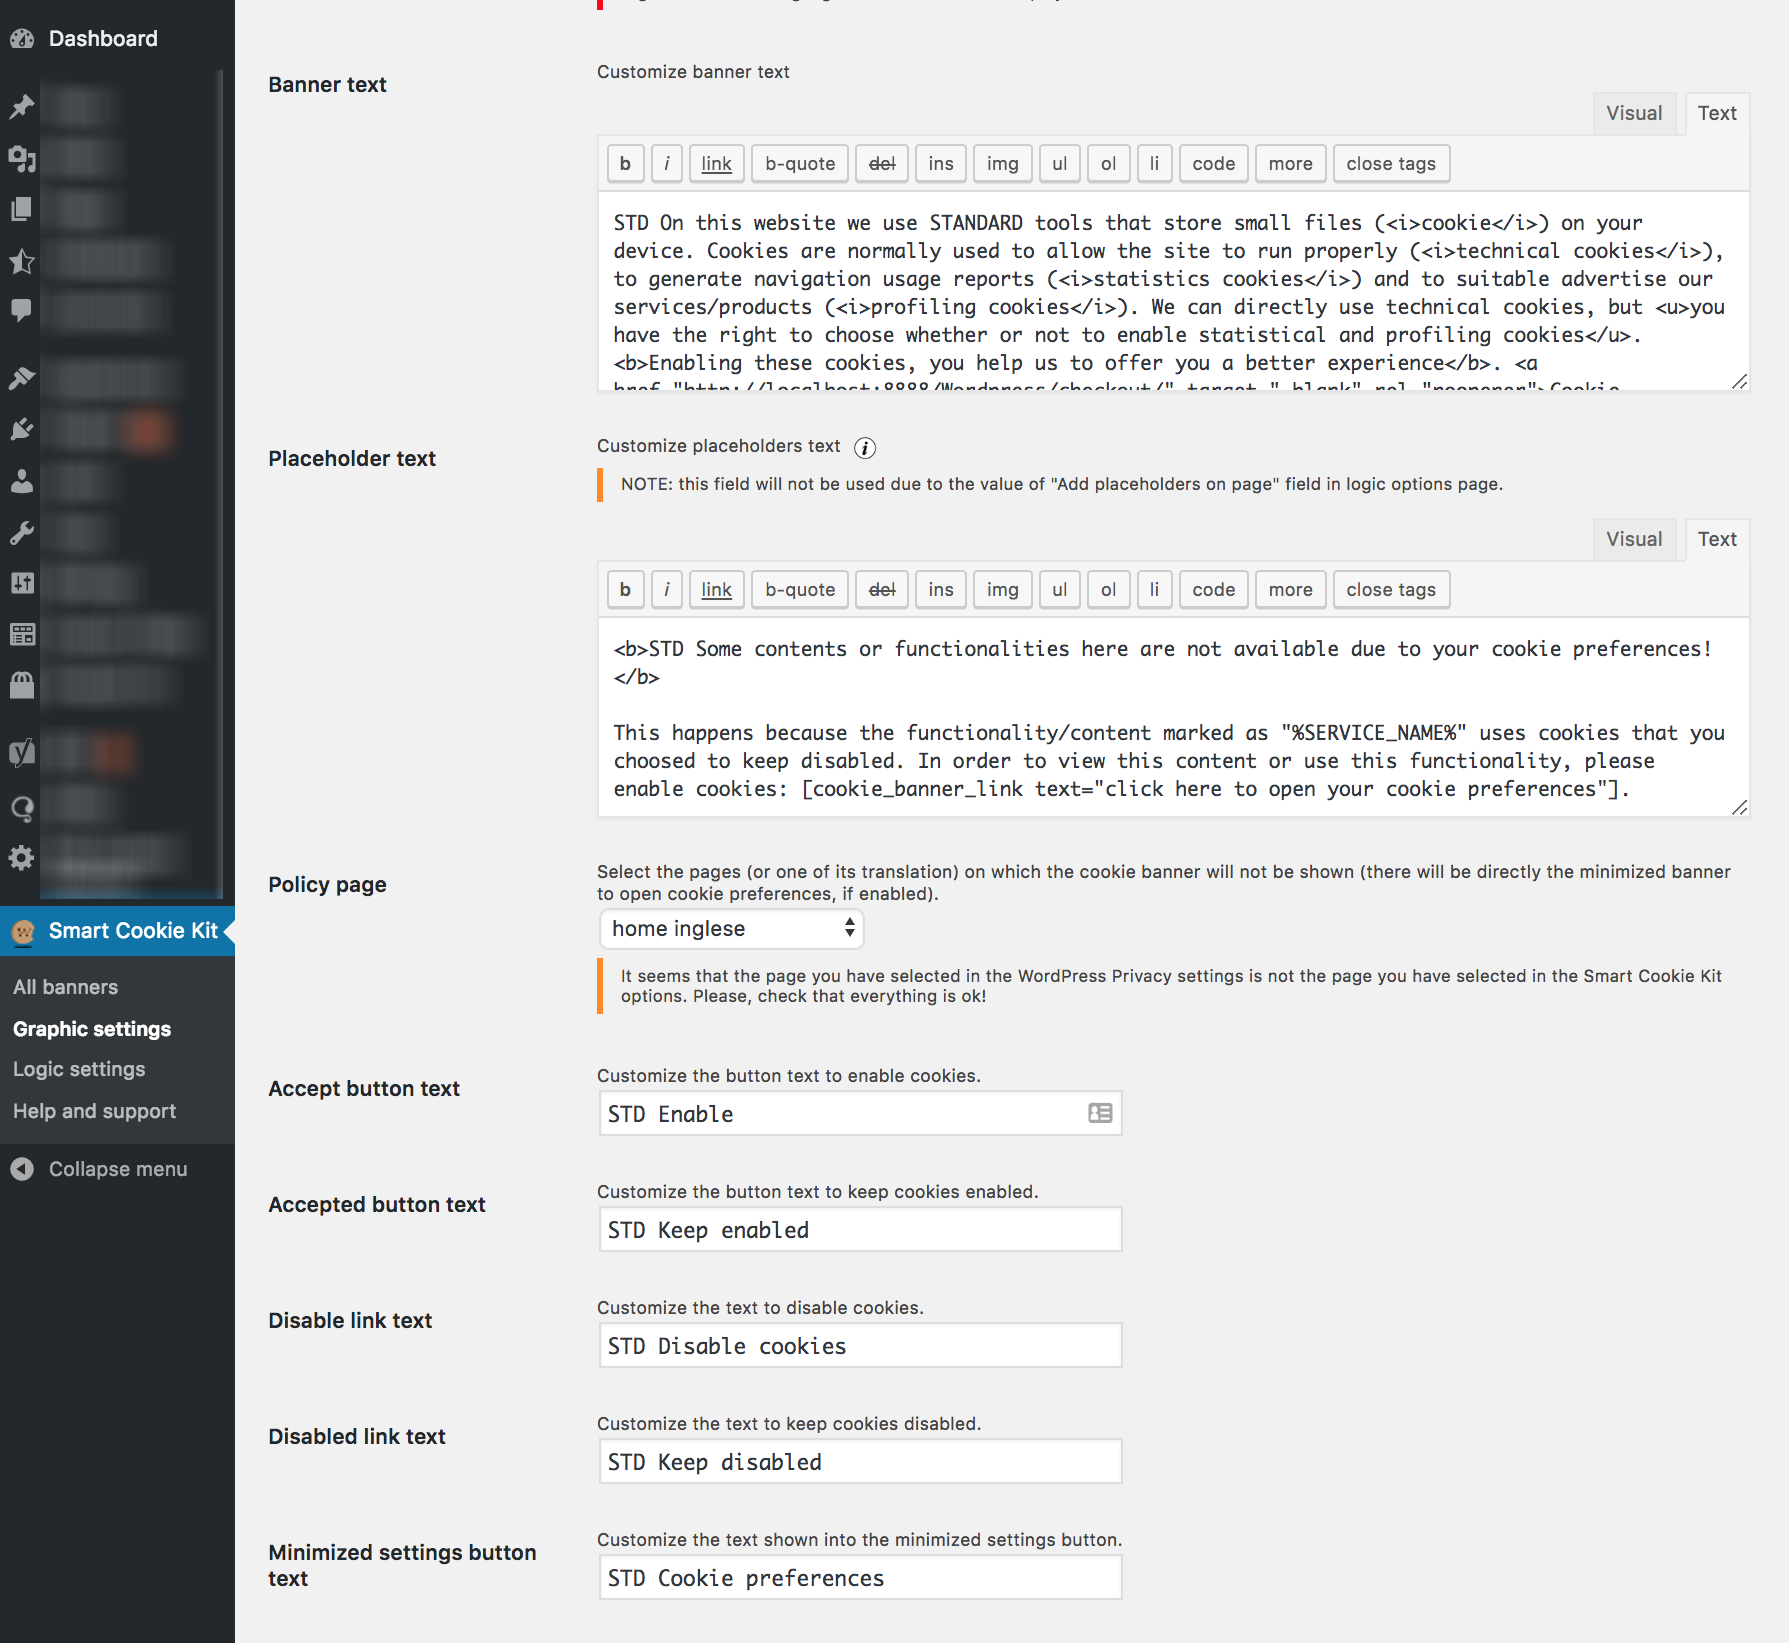 Backend graphic option page (2/2)